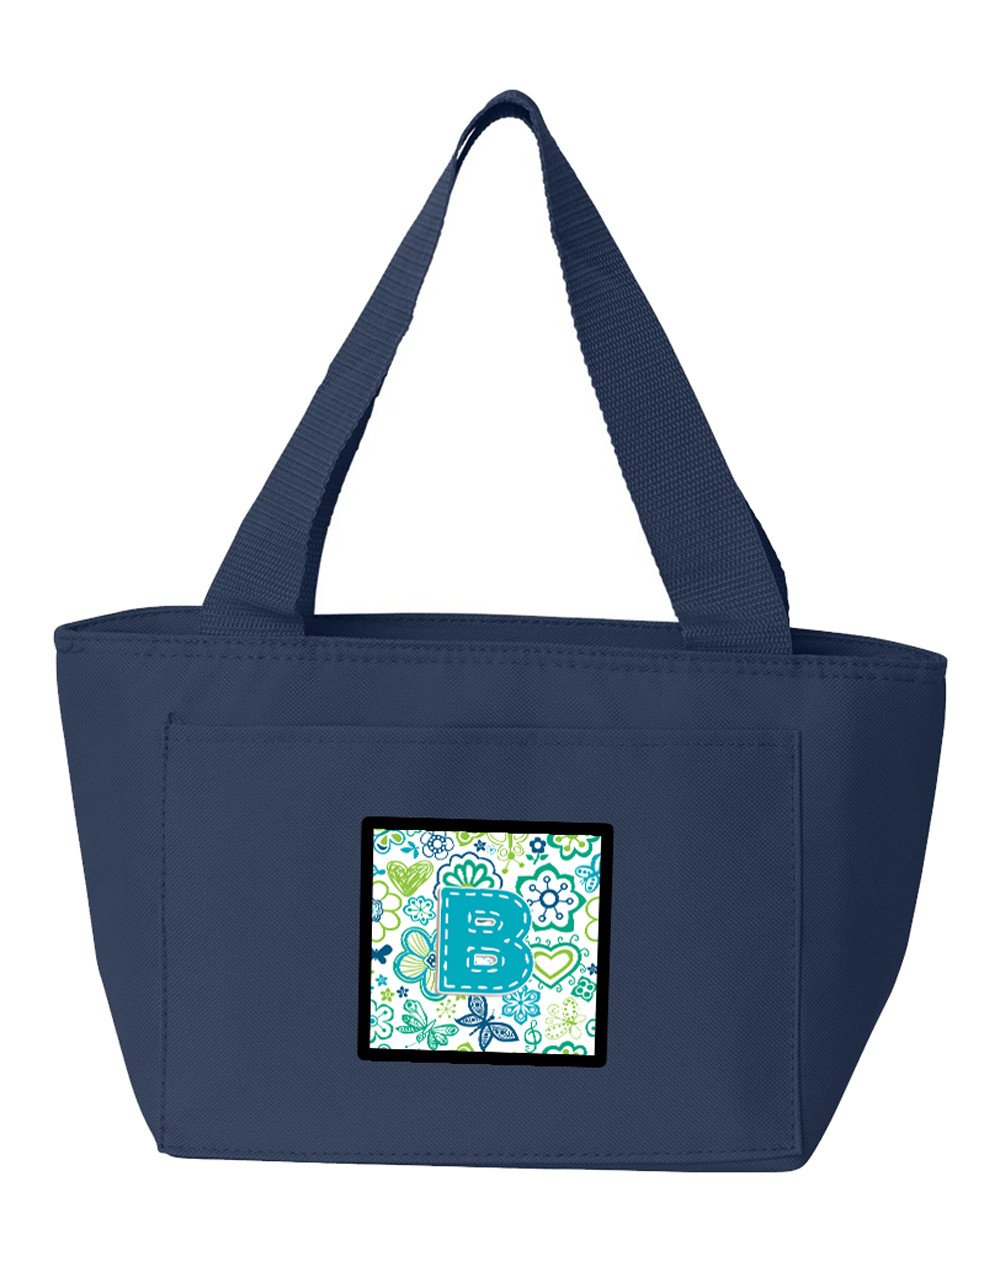 Letter B Flowers and Butterflies Teal Blue Lunch Bag CJ2006-BNA-8808 by Caroline's Treasures